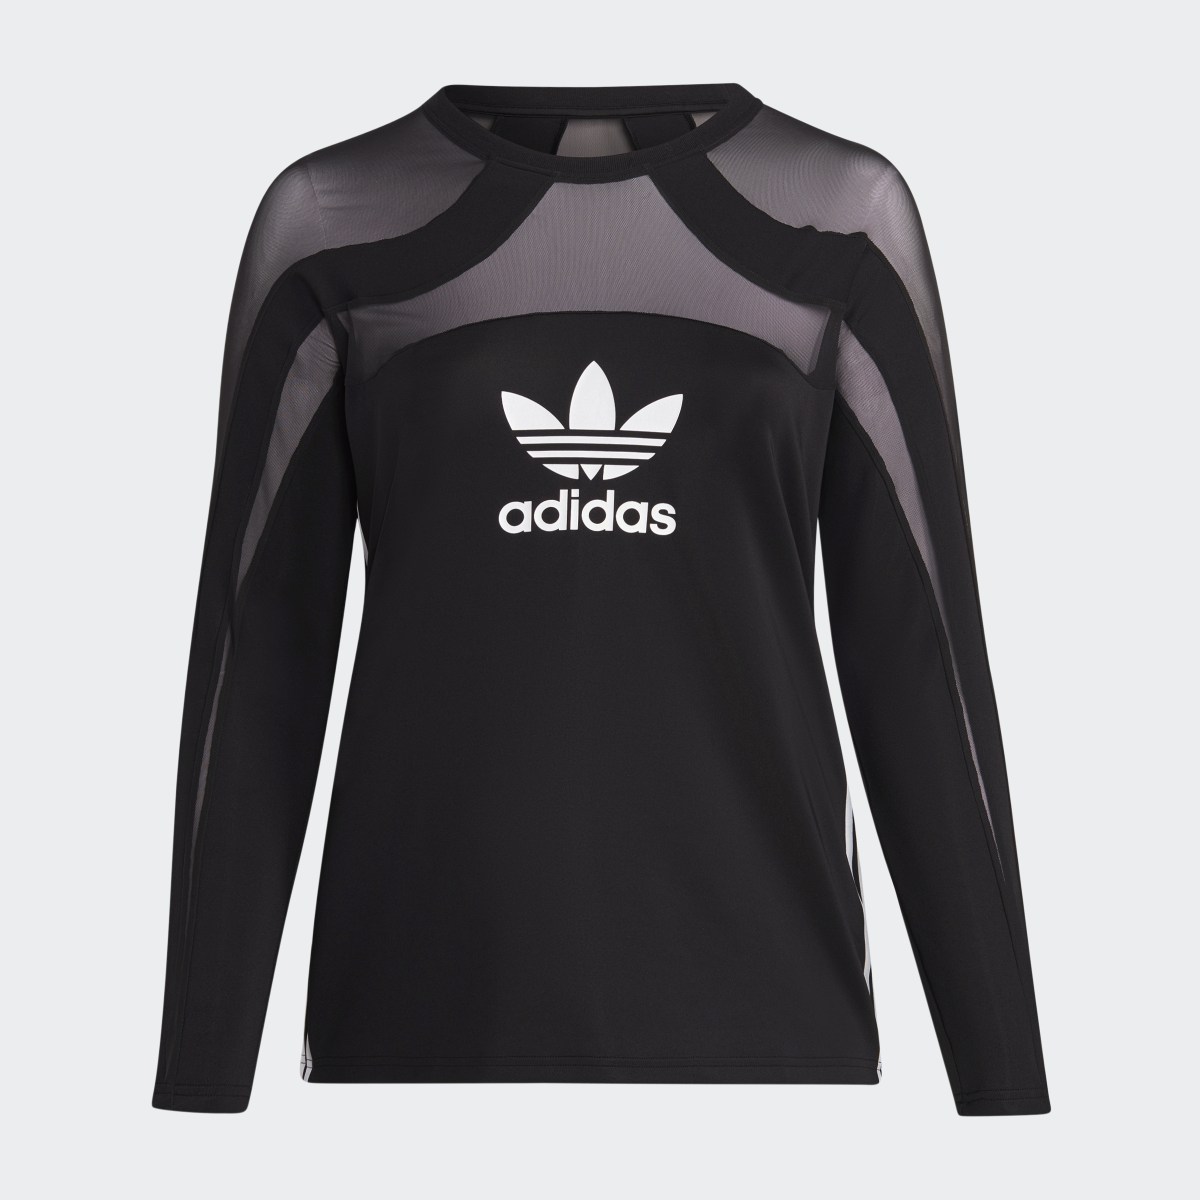 Adidas Centre Stage Mesh Top (Plus Size). 4